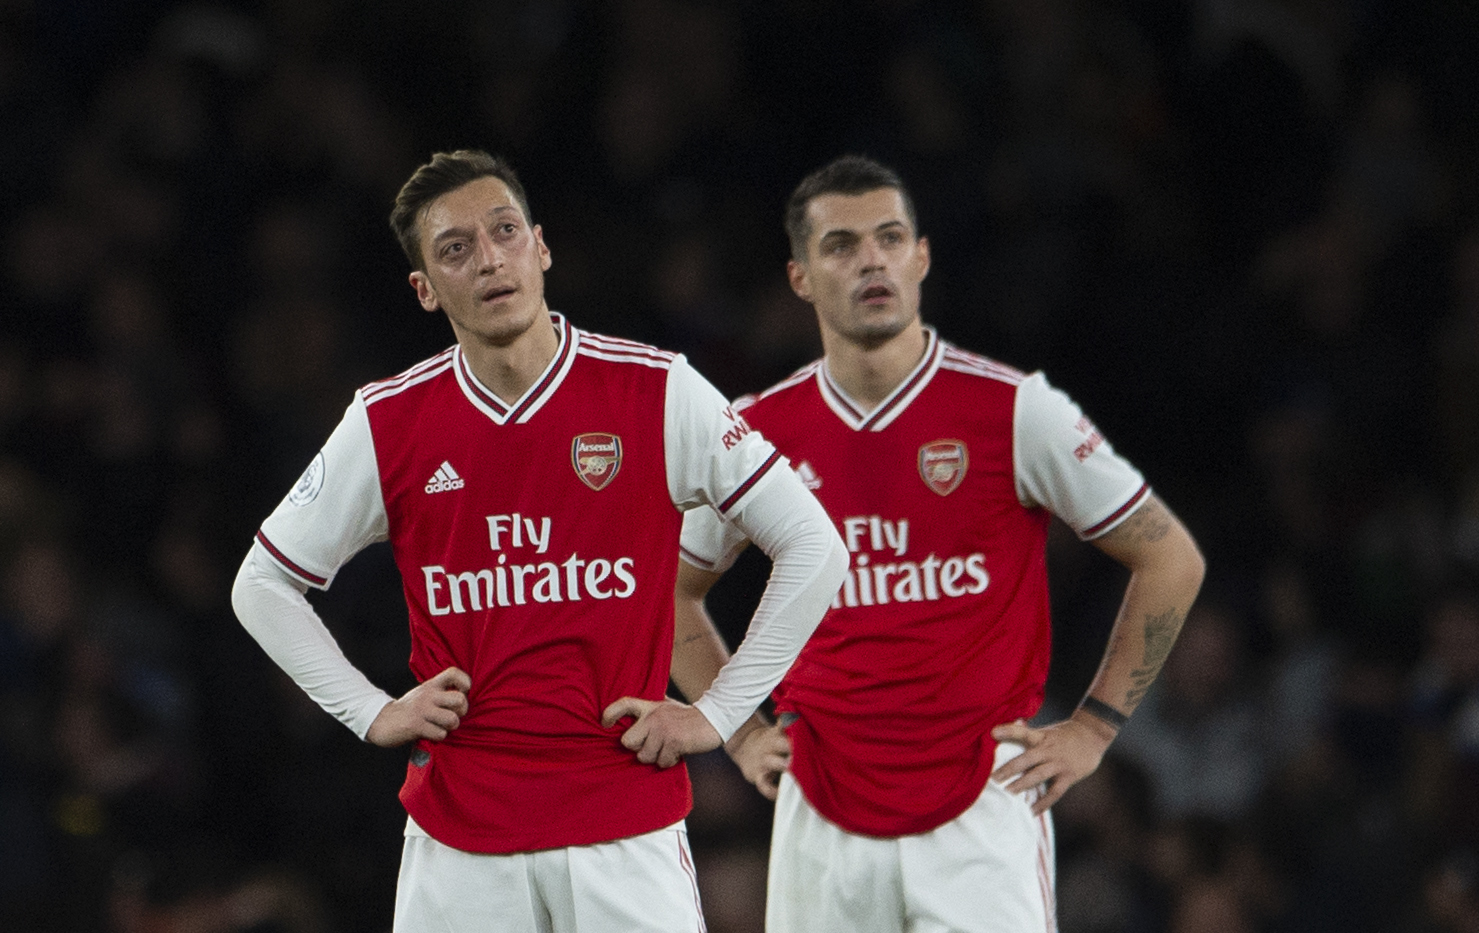 Granit Xhaka, right, has been handed a new contract despite suggestions he wanted to leave Arsenal this summer